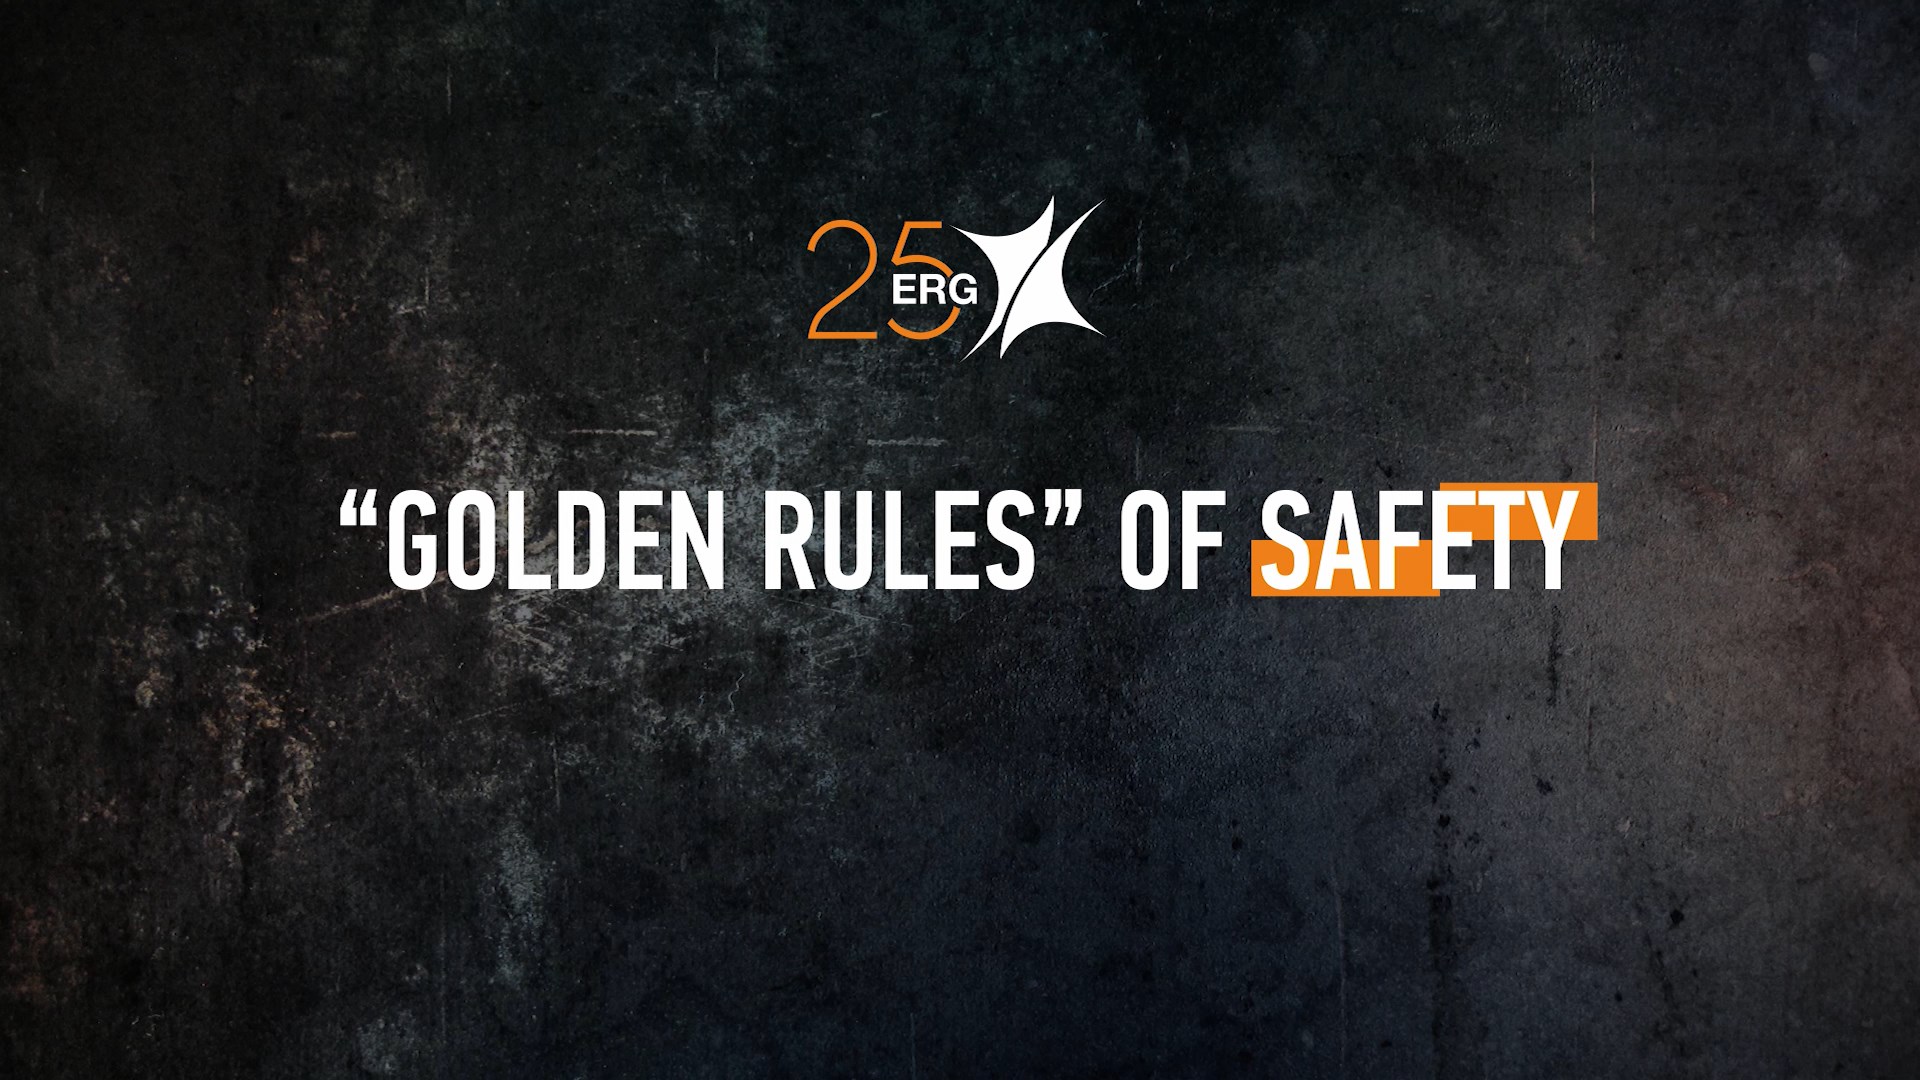 “Golden Rules” of safety